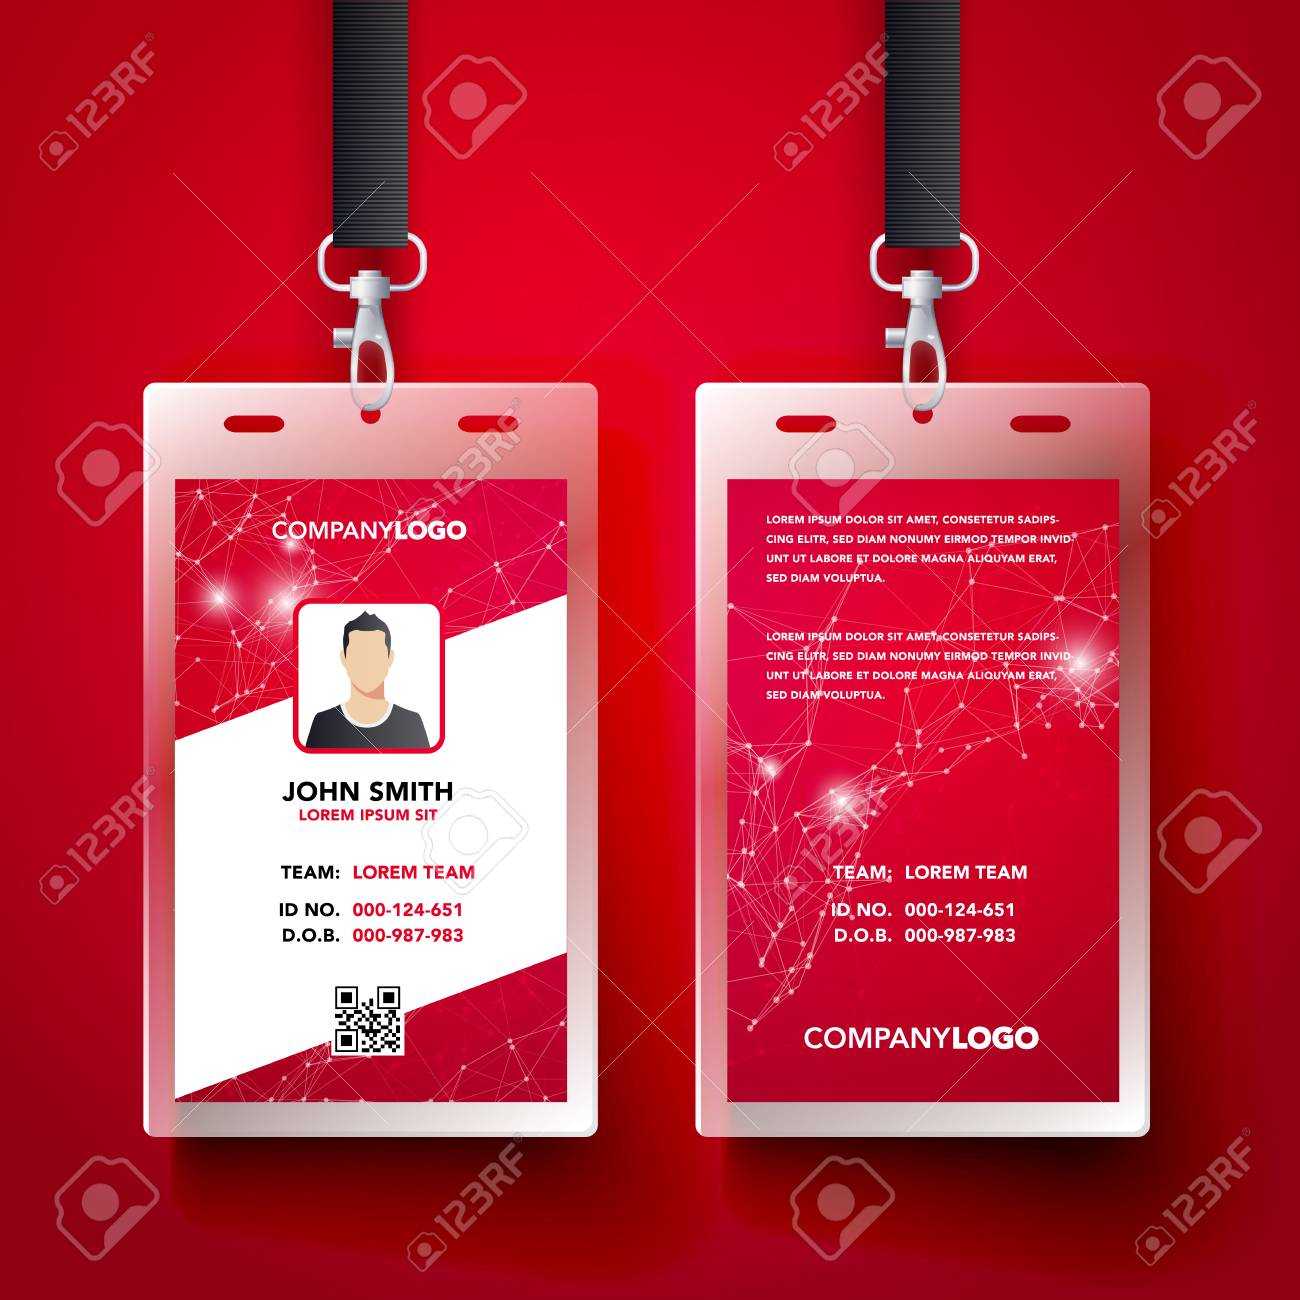 Vector Illustration Red Corporate Id Card Design Template Set Throughout Company Id Card Design Template